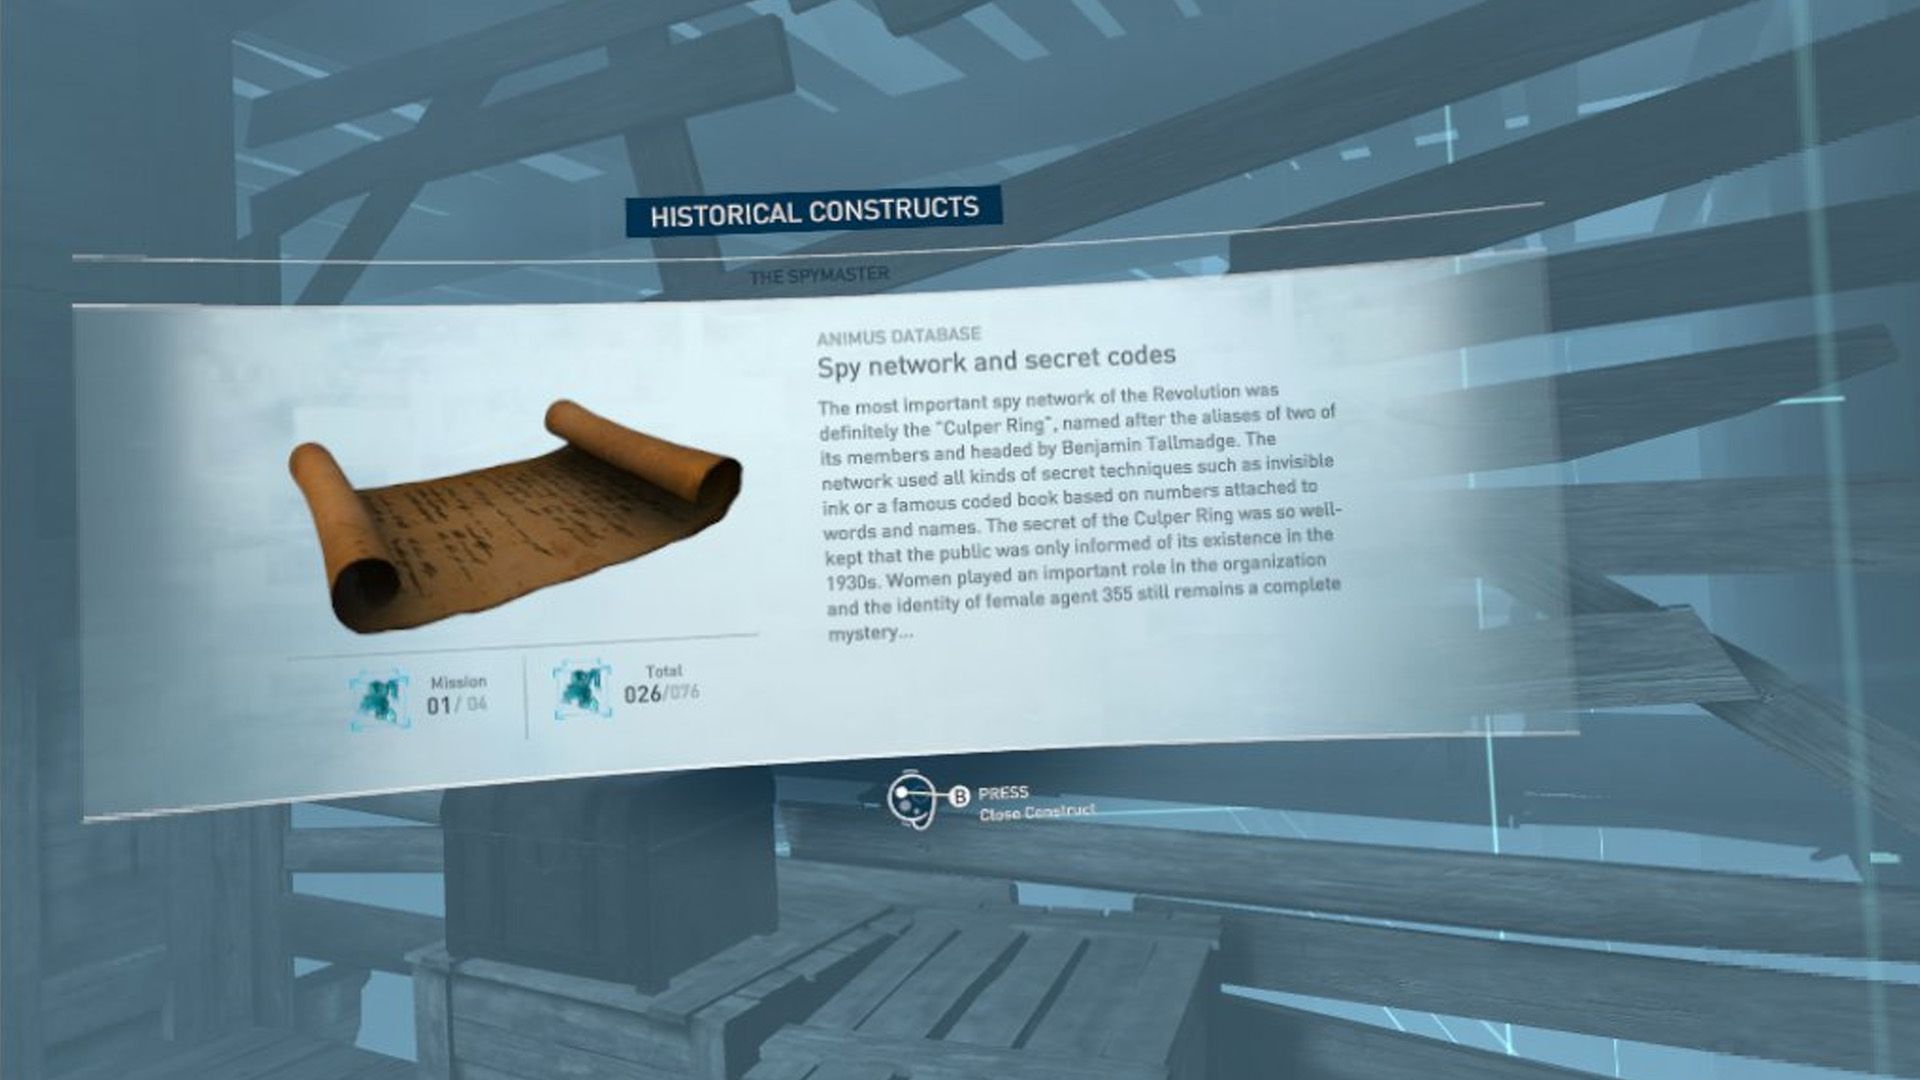 A Historical Construct talking about Washington's spy ring in AC Nexus VR.